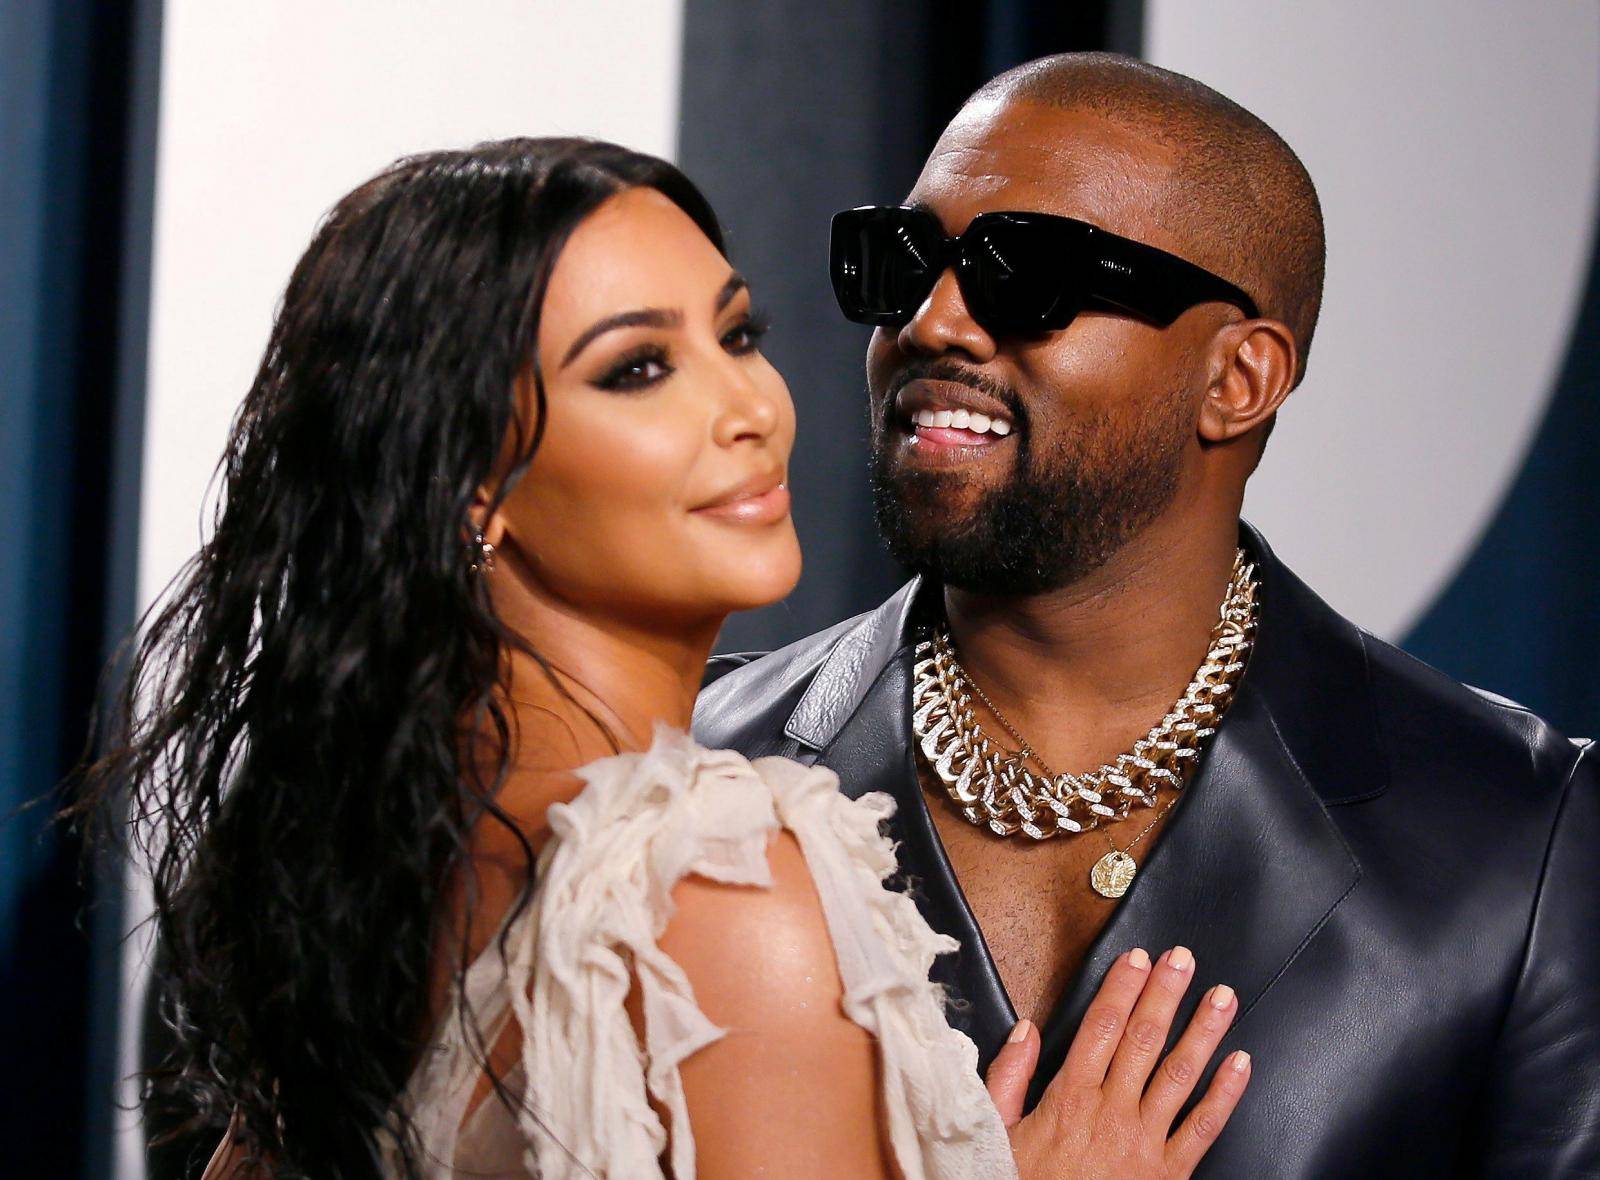 FILE PHOTO: Kim Kardashian and Kanye West attend a Vanity Fair Oscar party in Beverly Hills